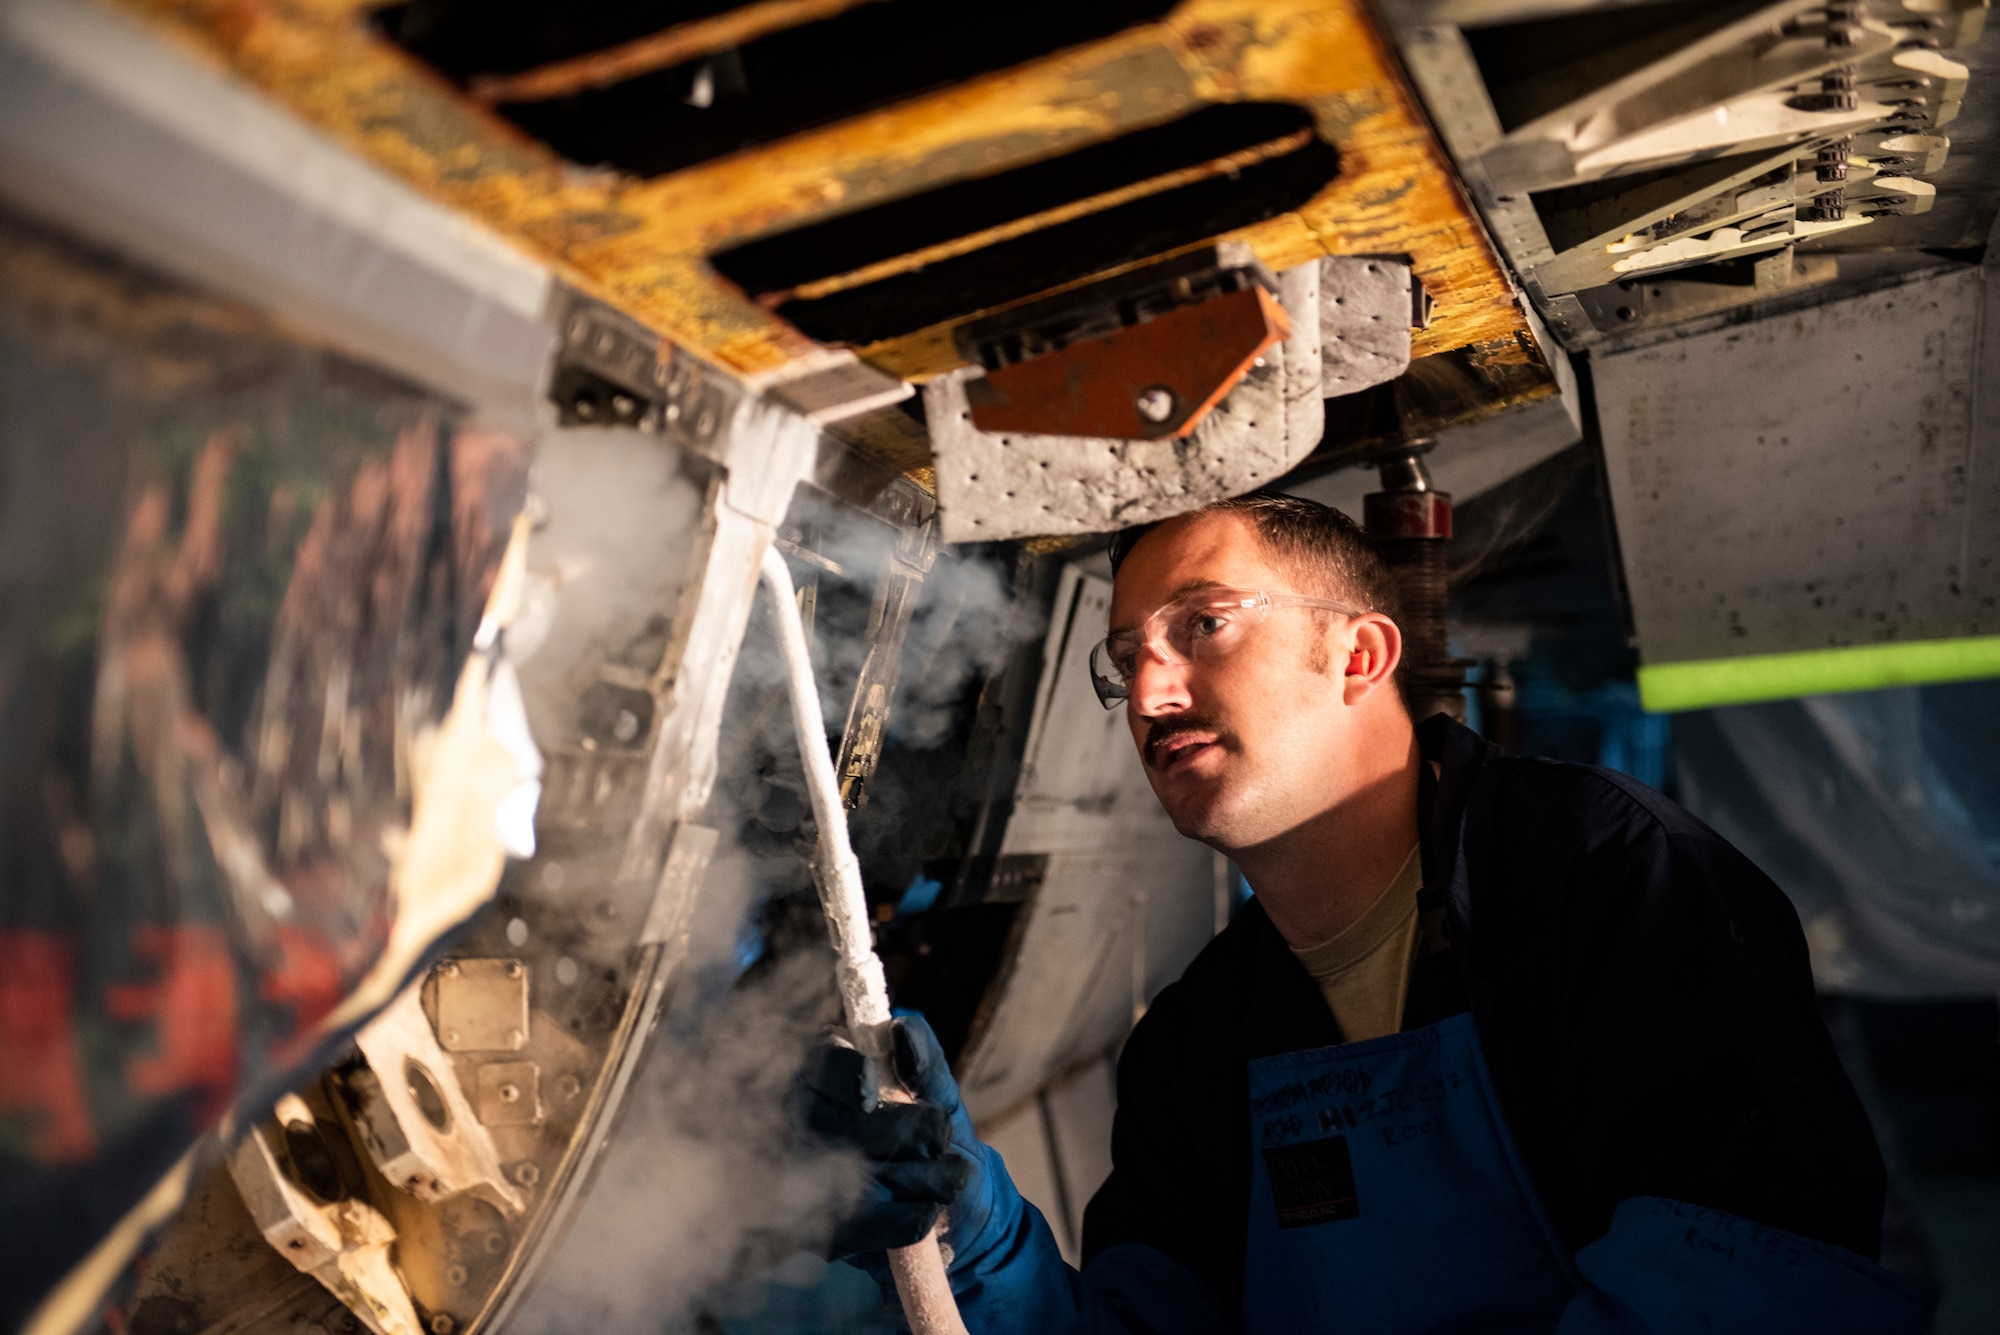 U.S. Air Force Tech. Sgt. Tyler Stratman, 309th Aircraft Maintenance Group depot structural maintenance specialist from Hill Air Force Base, Utah, sprays the bulkhead of an F-16 Fighting Falcon with liquid nitrogen at Kunsan Air Base, Republic of Korea, Nov. 8, 2018. Multiple components on aircraft had to be replaced in order to maintain the lifespan, keep them operational, and sharpen the lethality of the Wolf Pack fleet. (U.S. Air Force photo by Senior Airman Stefan Alvarez)